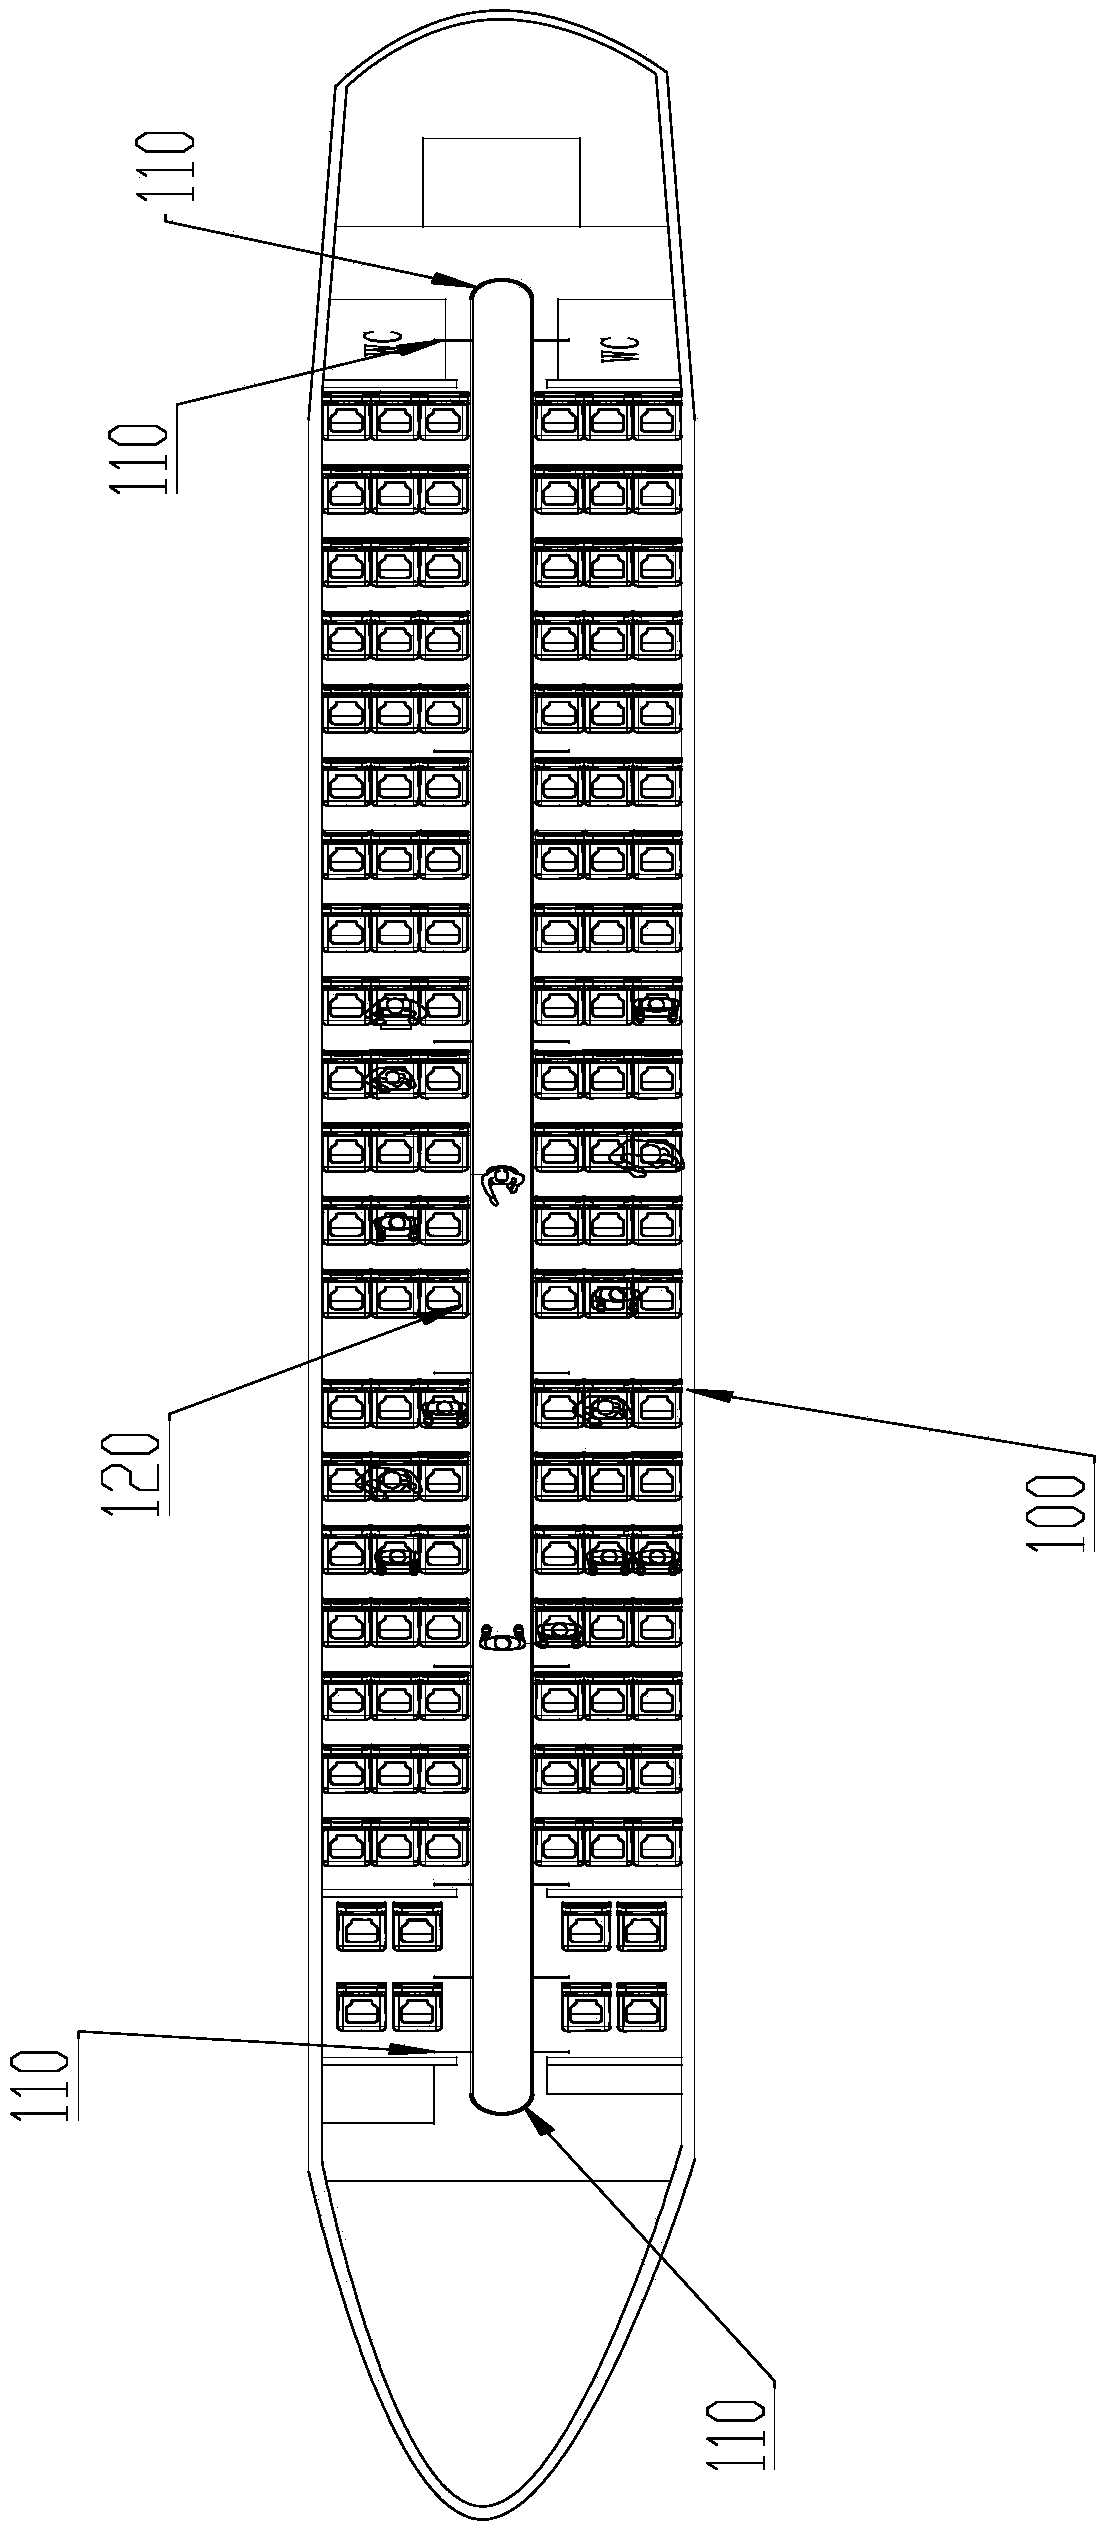 Airplane flight attendant safety guaranteeing device